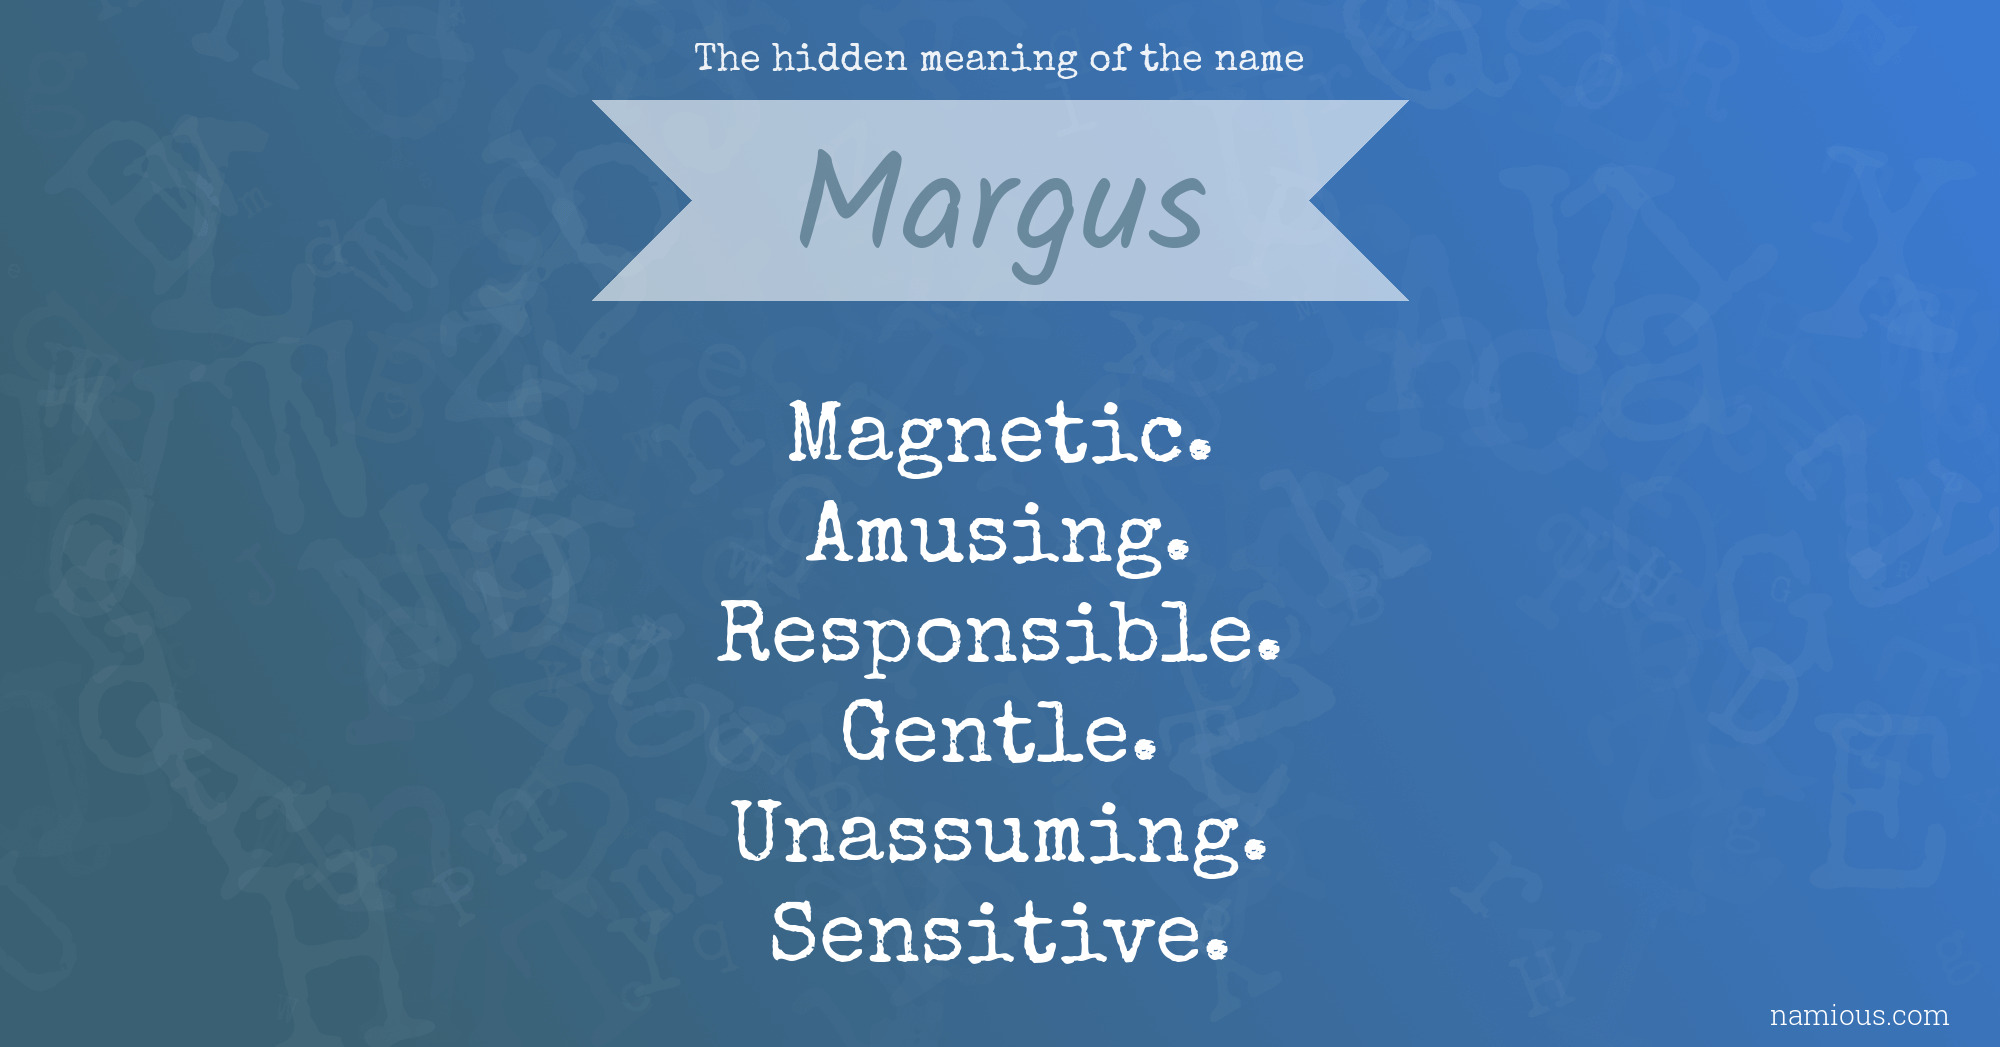 The hidden meaning of the name Margus